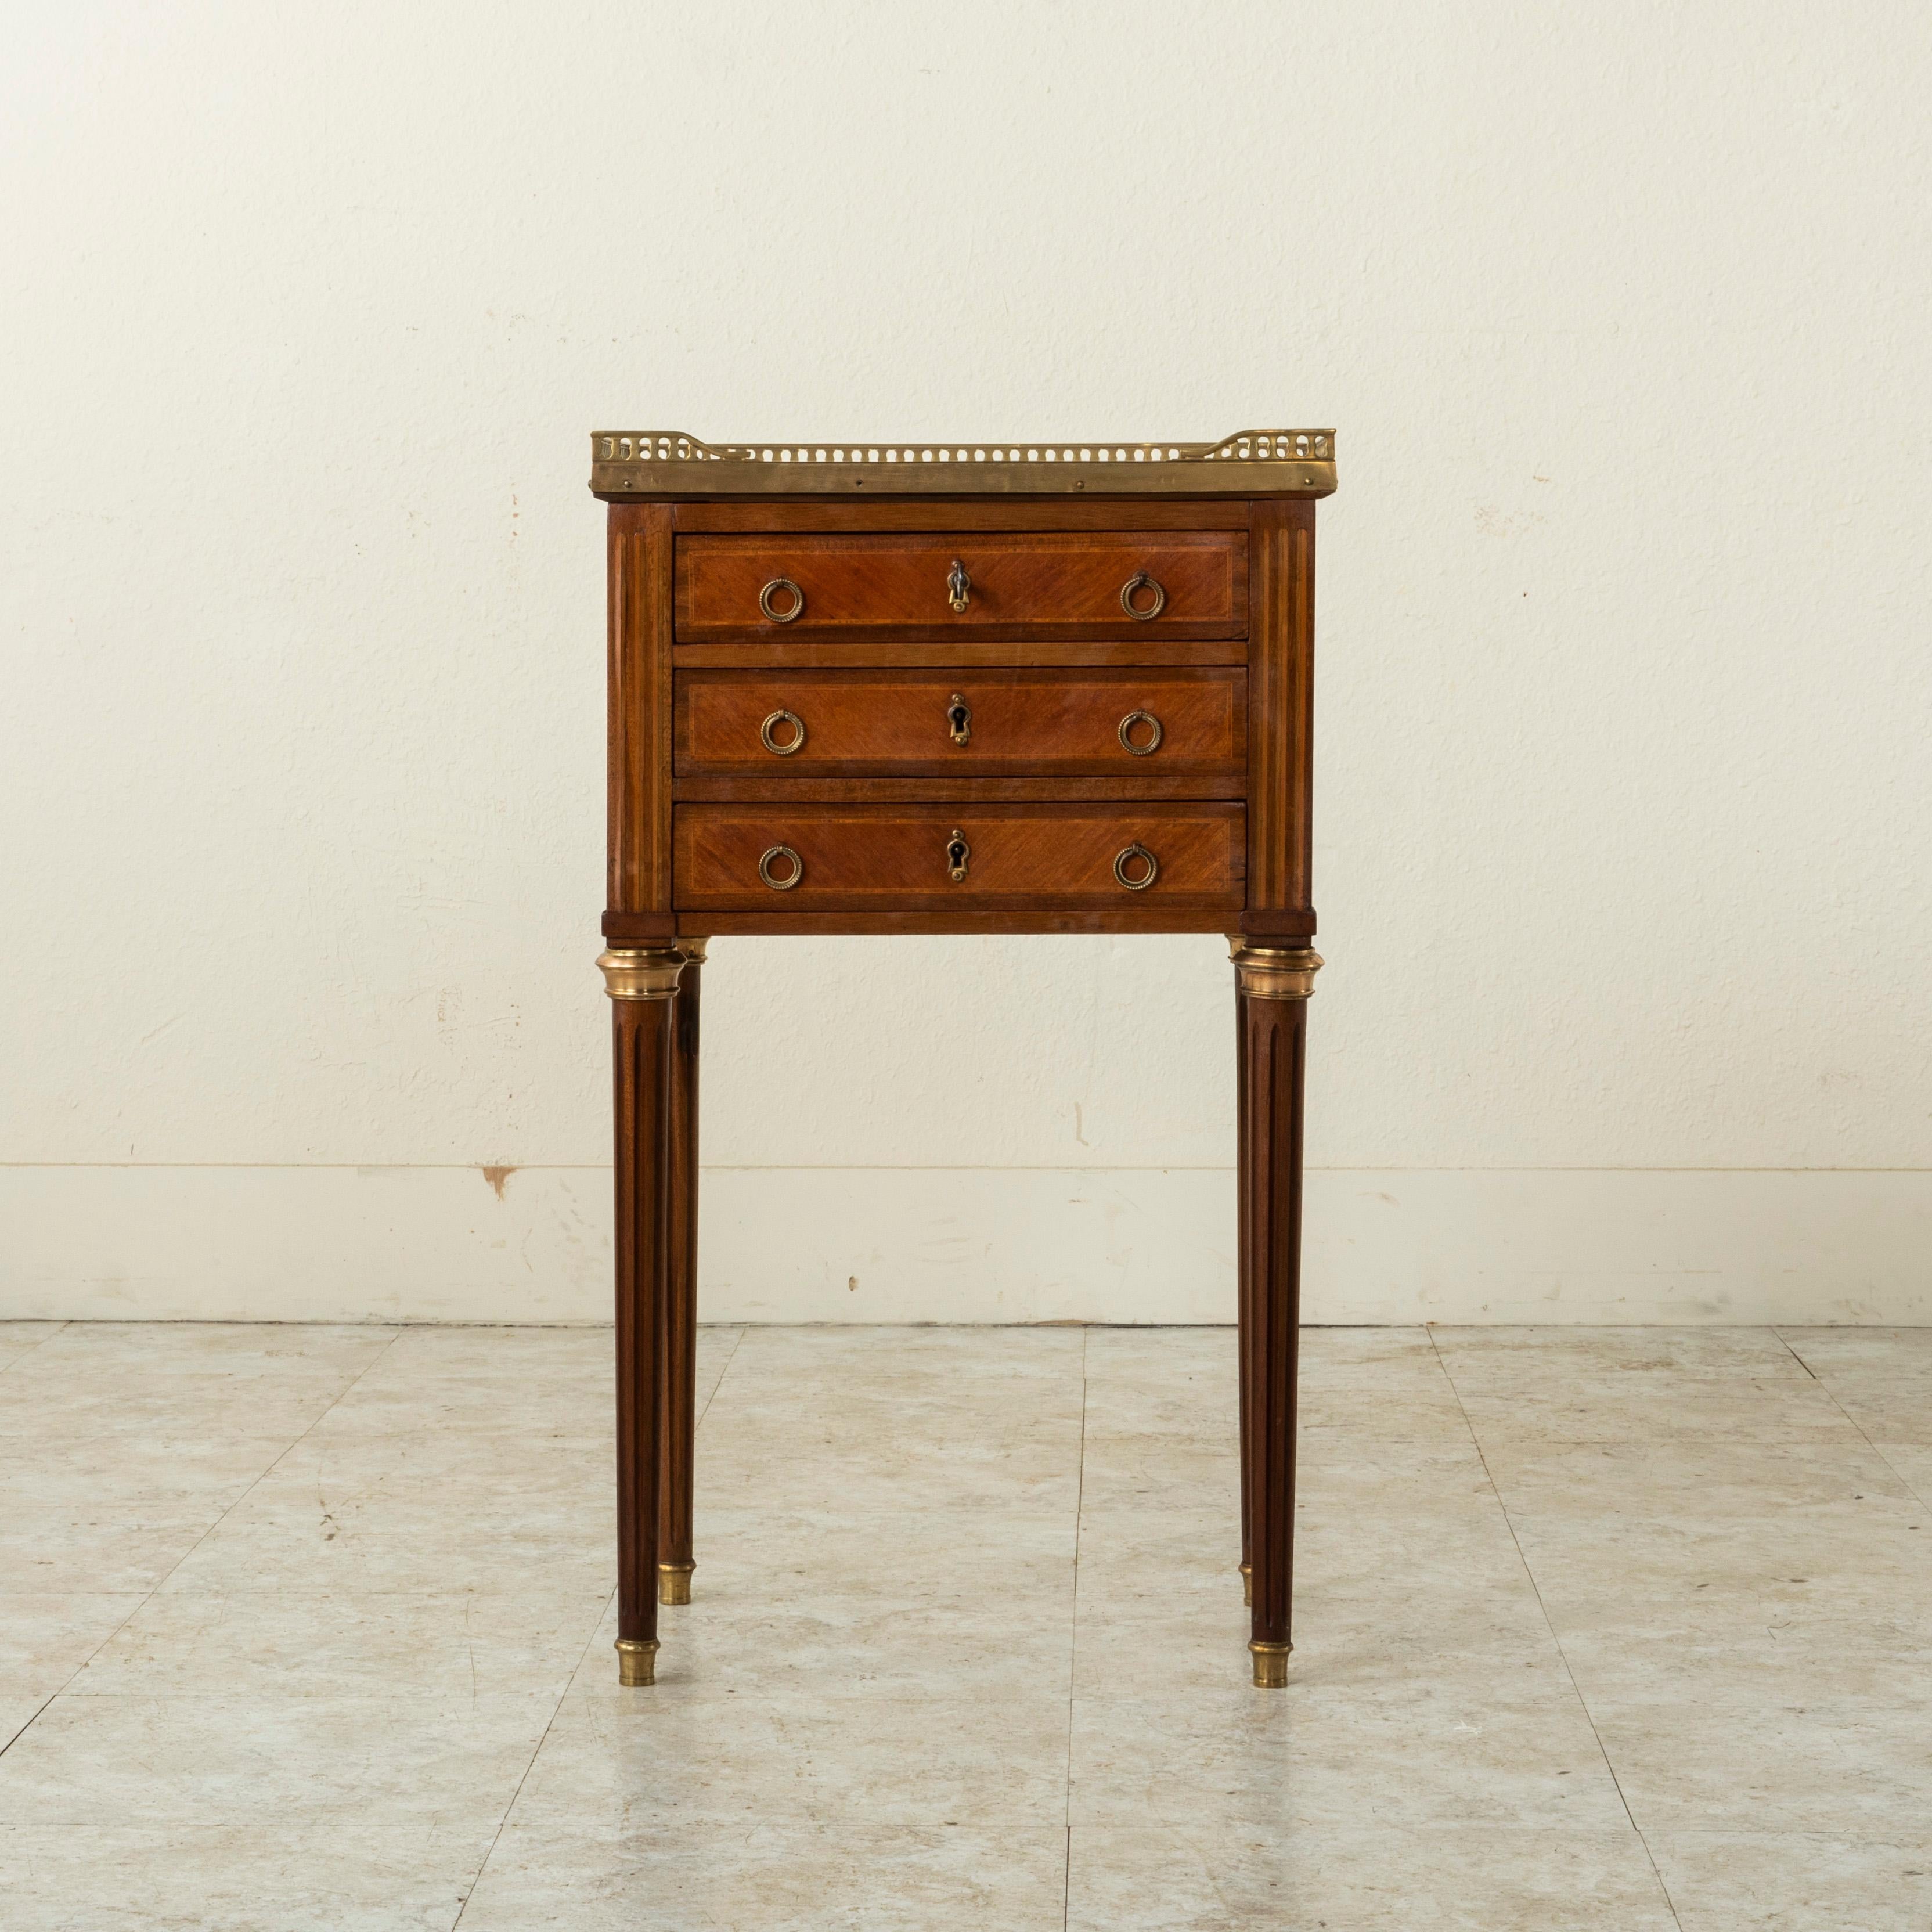 This early twentieth century French Louis XVI style rosewood side table or nightstand features inlaid fluted corners of sycamore and lemonwood. A pieced bronze gallery surrounds its white marble top. Its three drawers of dovetail construction are